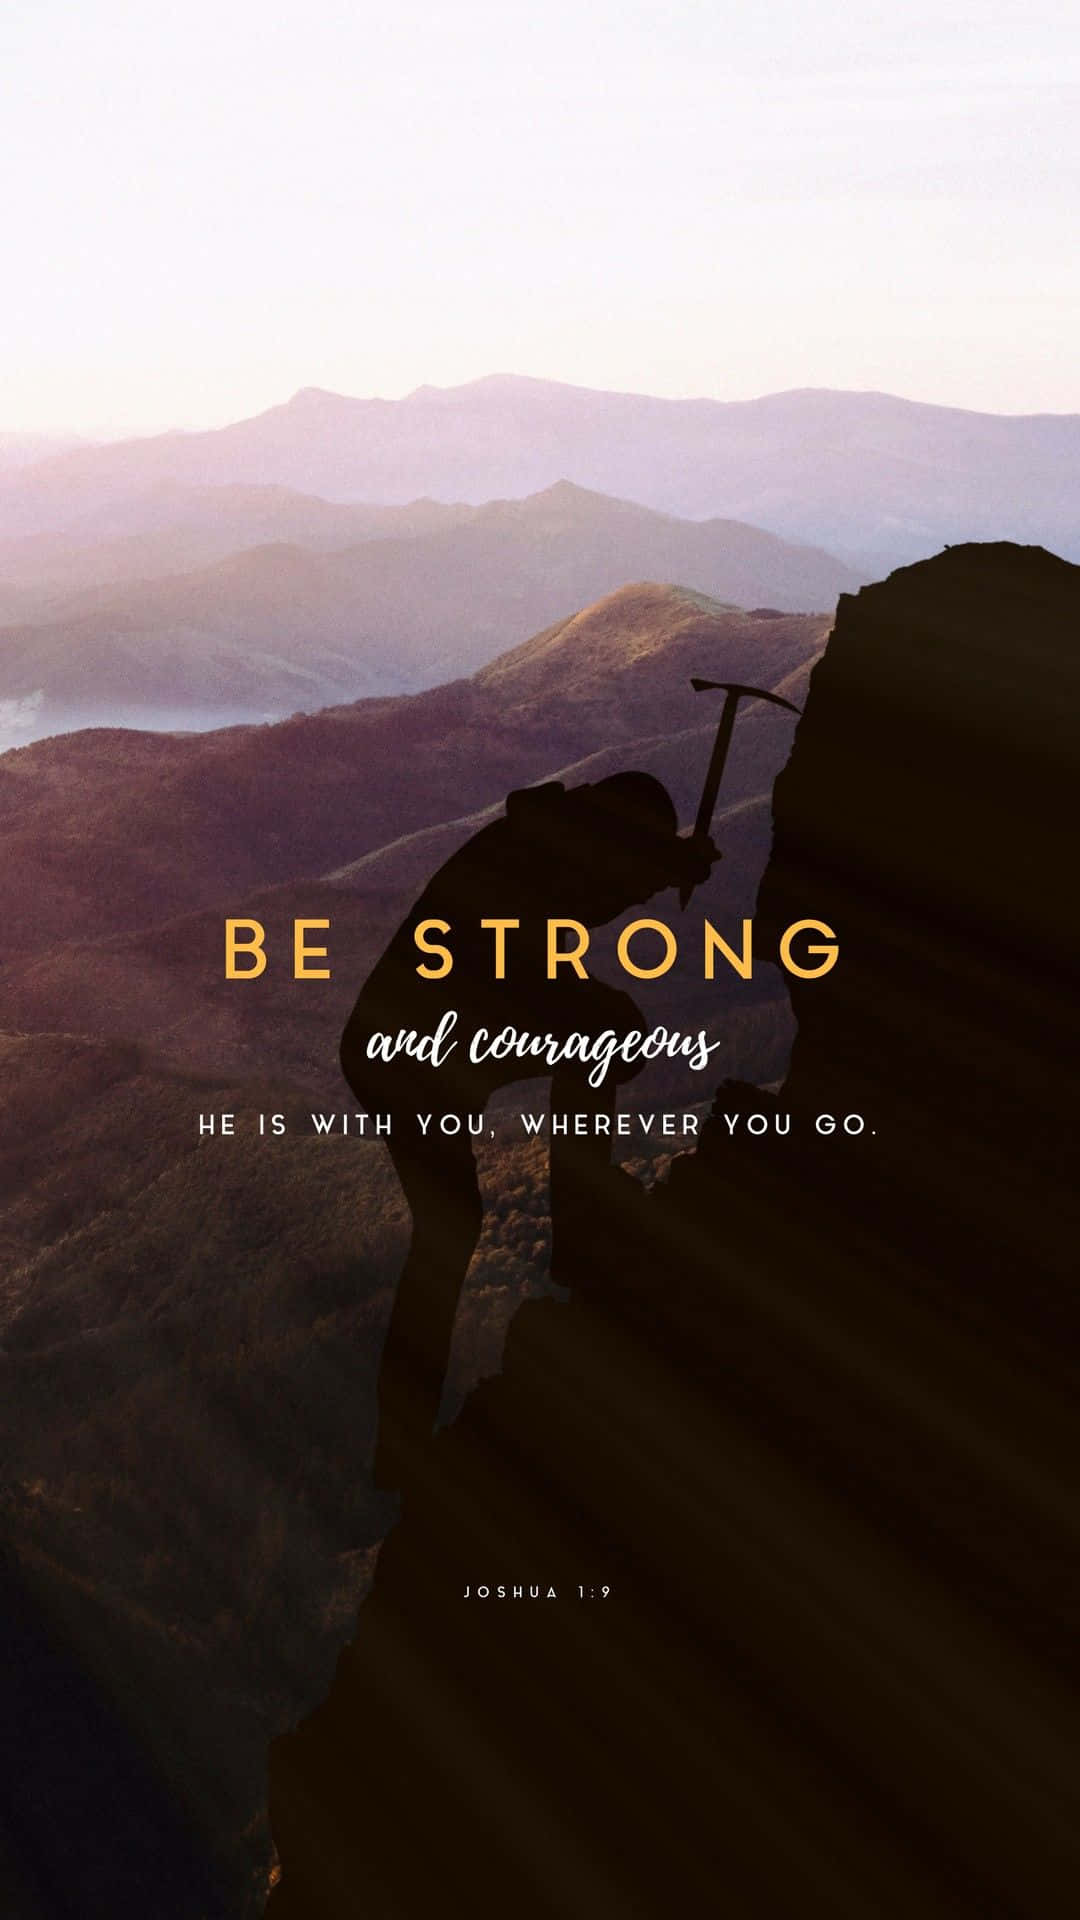 Be Strong And Courageous Joshua19 Inspirational Poster Wallpaper